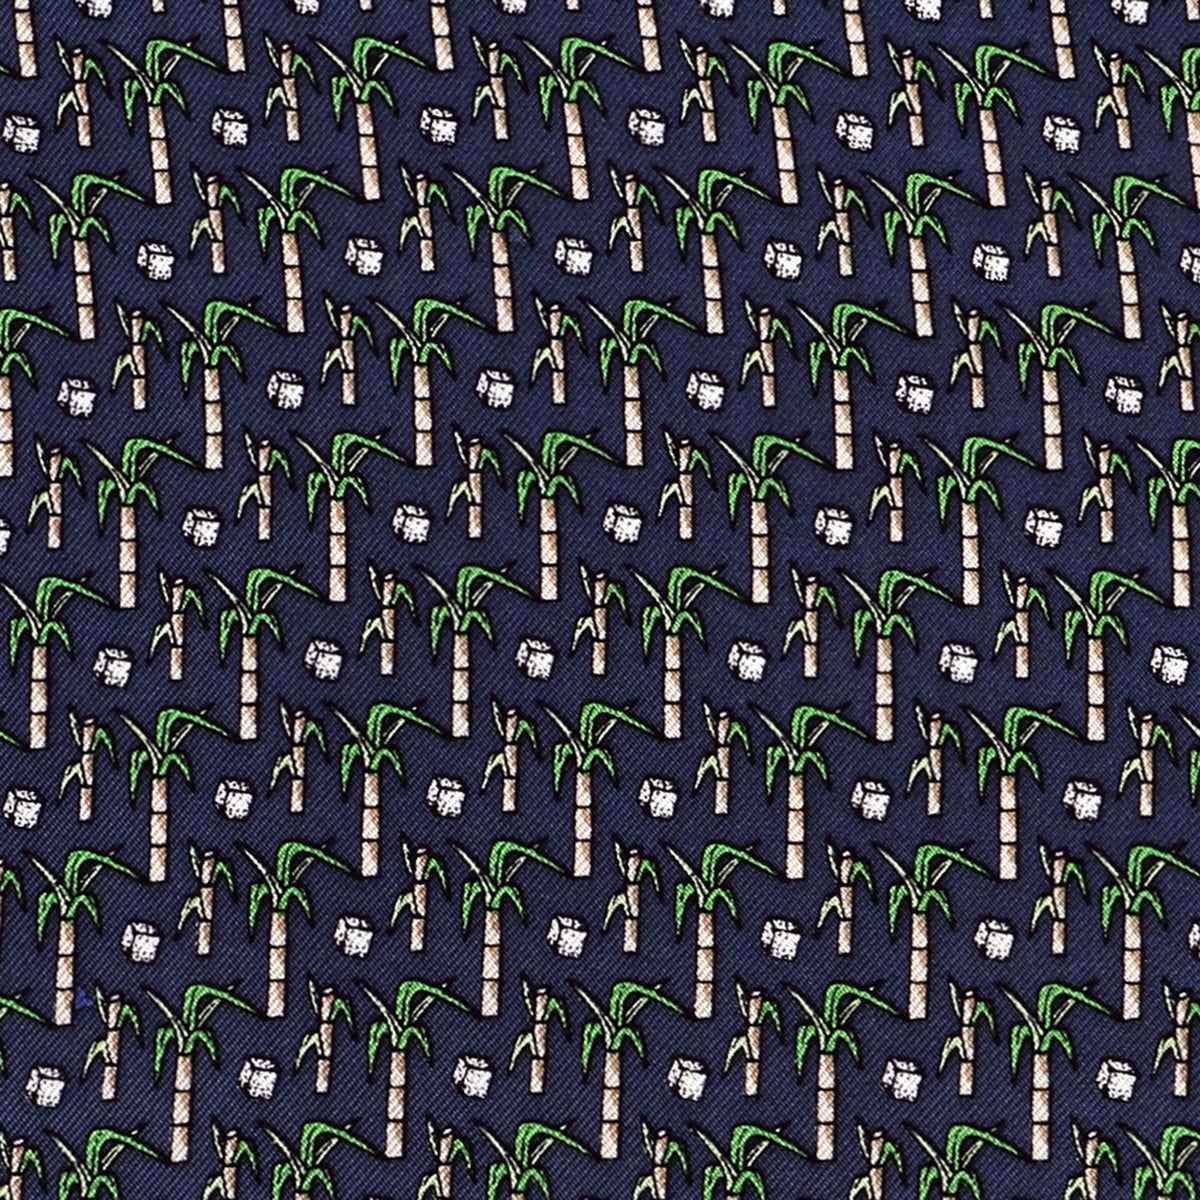 Limited Edition NOLA Couture X Haspel Navy Sugarcane Print Bow Tie - O/S